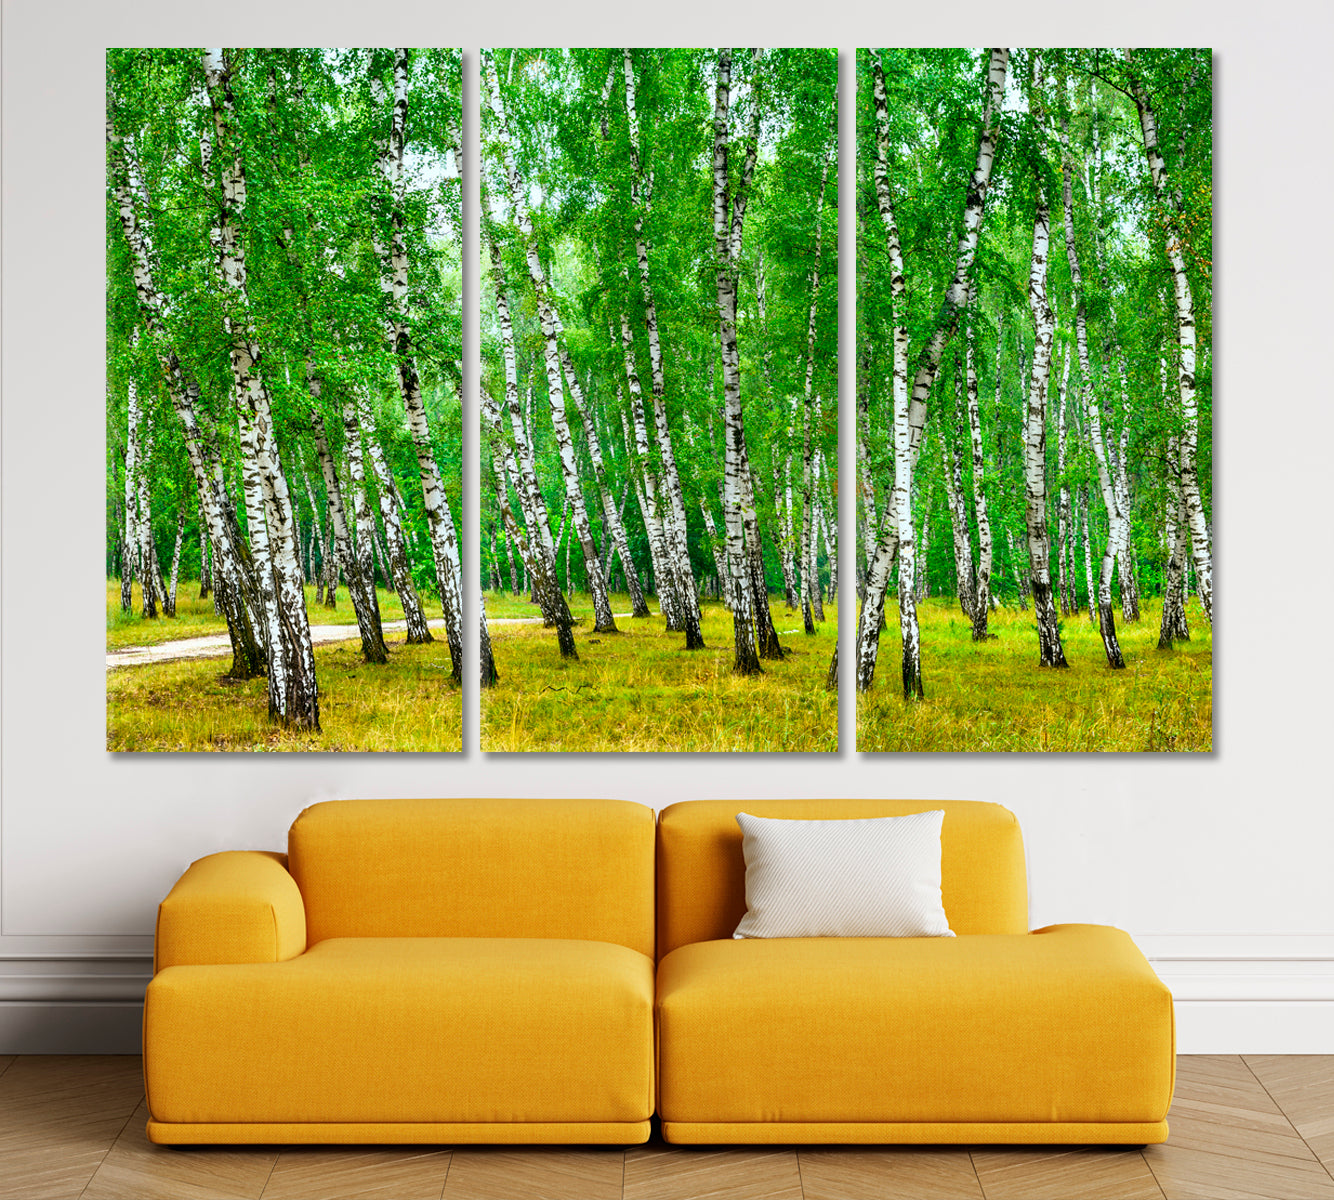 Birch Grove Sunny Summer Day Panorama Nature Wall Canvas Print Artesty 3 panels 36" x 24" 